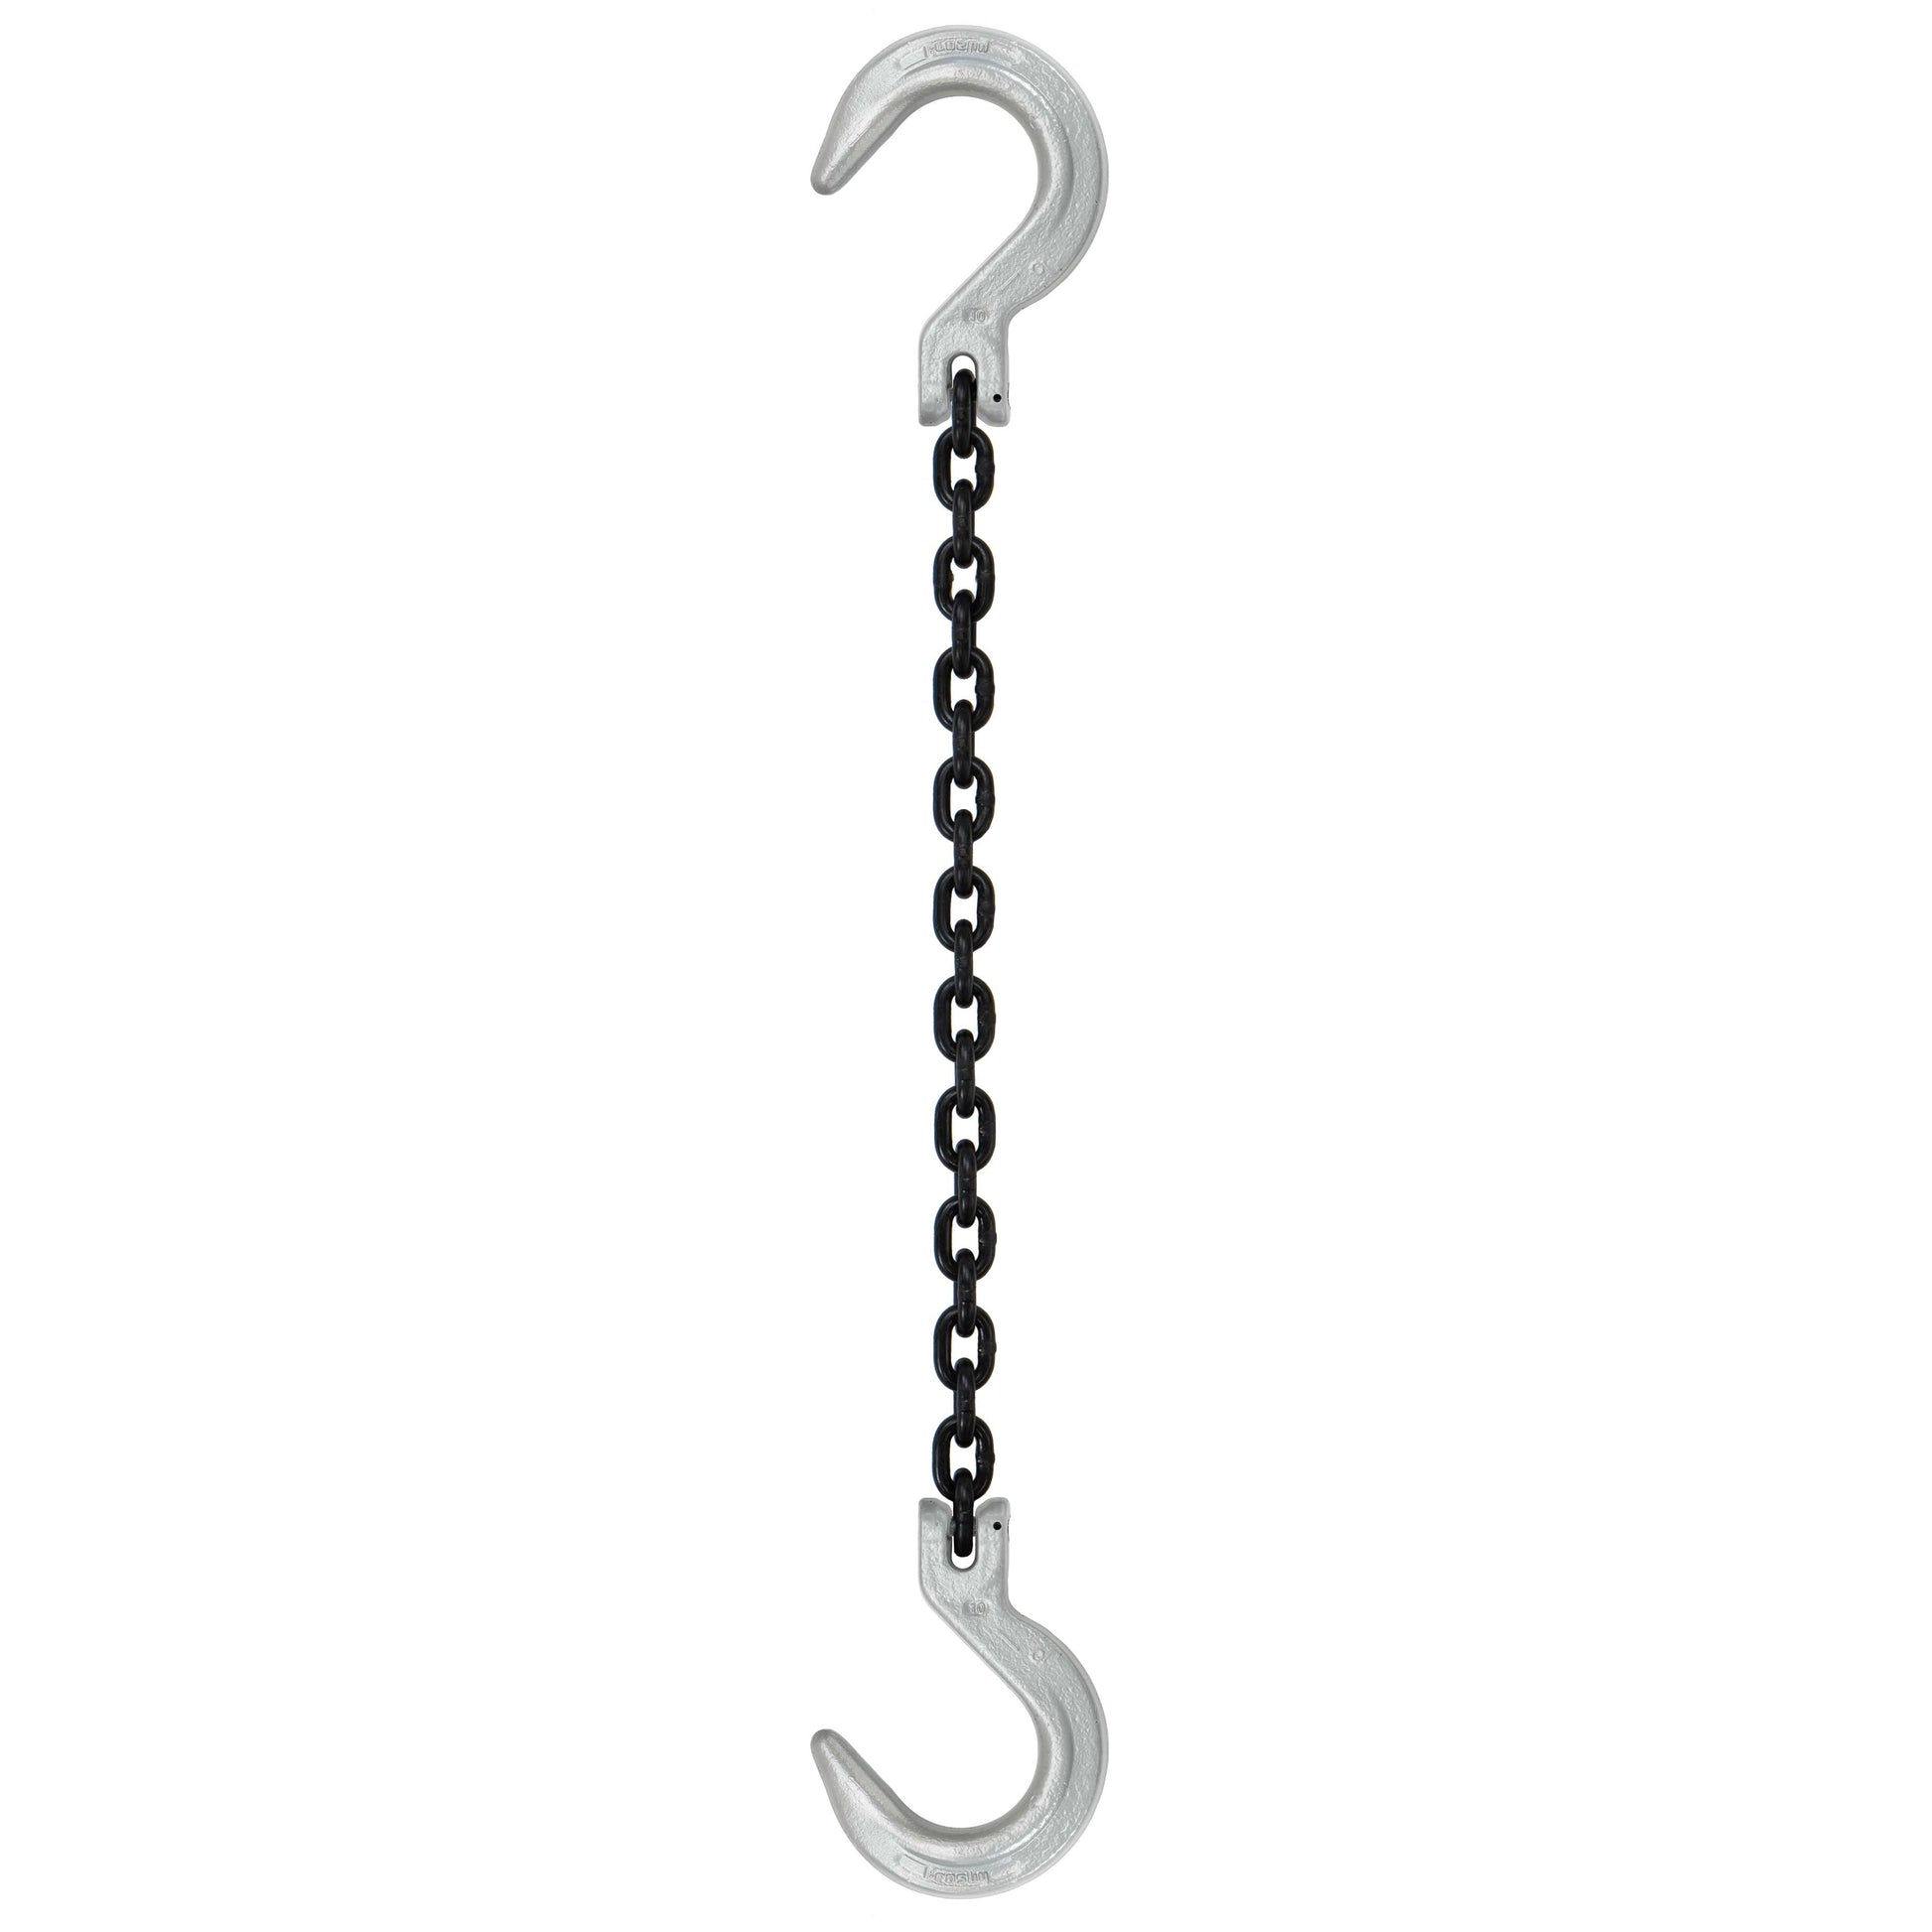 12 inch x 3 foot Domestic Single Leg Chain Sling w Crosby Foundry & Foundry Hooks Grade 100 image 1 of 2